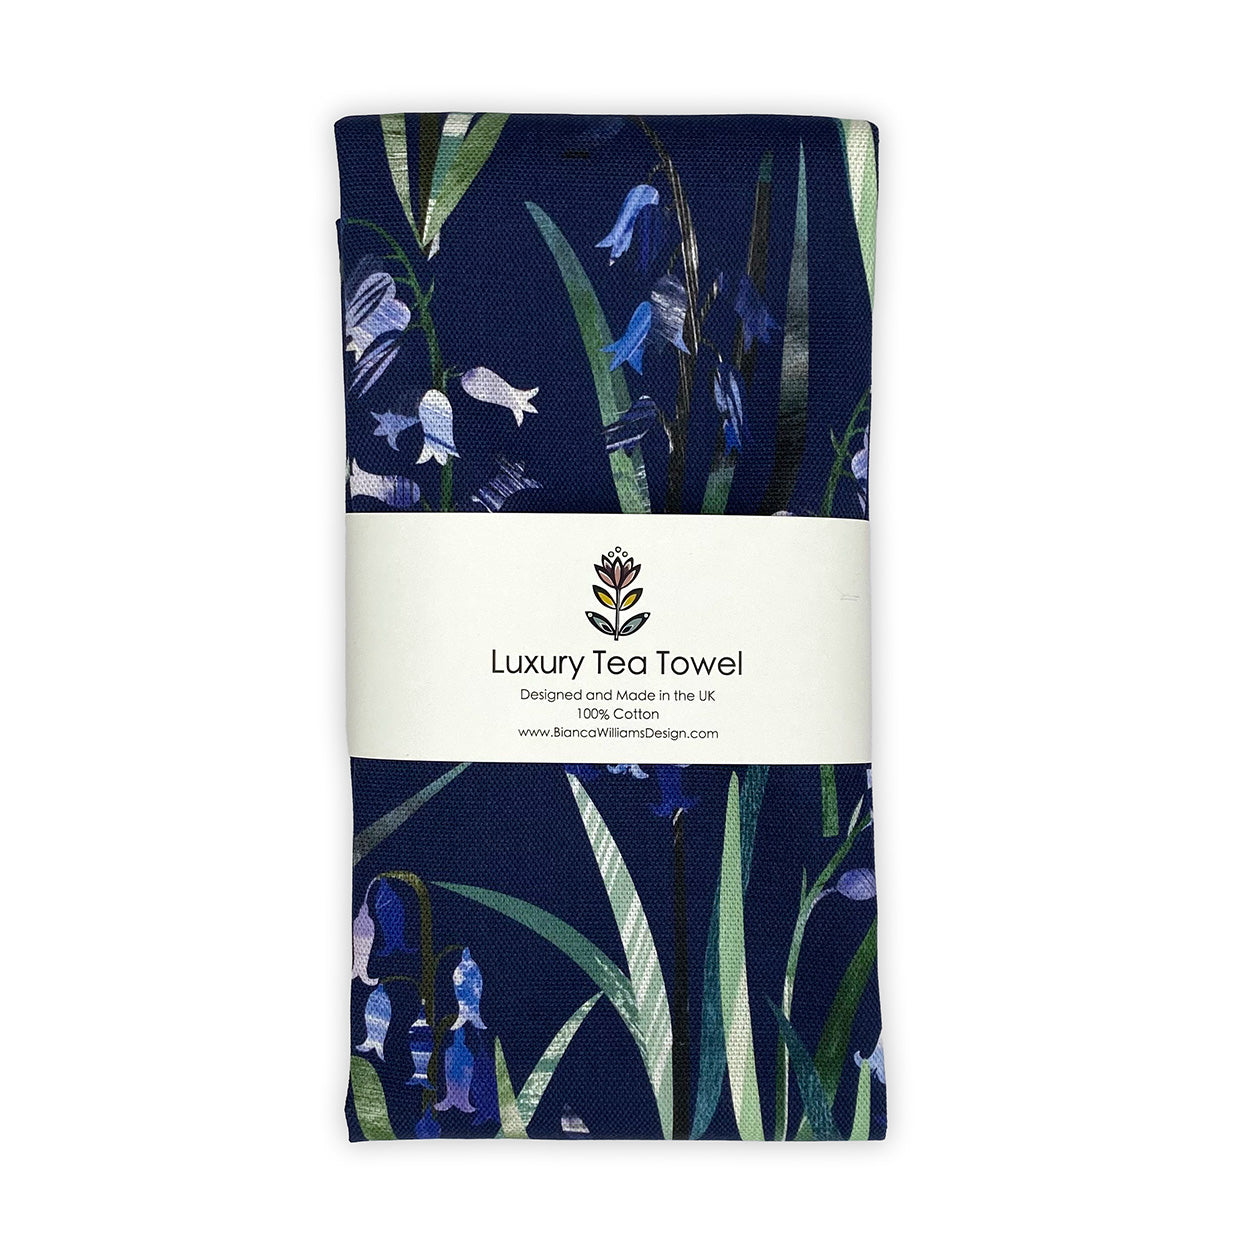 A Navy Blue Bluebell Tea Towel featuring hand collaged Bluebell motifs with the pretty little bluebell flowers and green leaves has been packaged and placed on a plain white background.